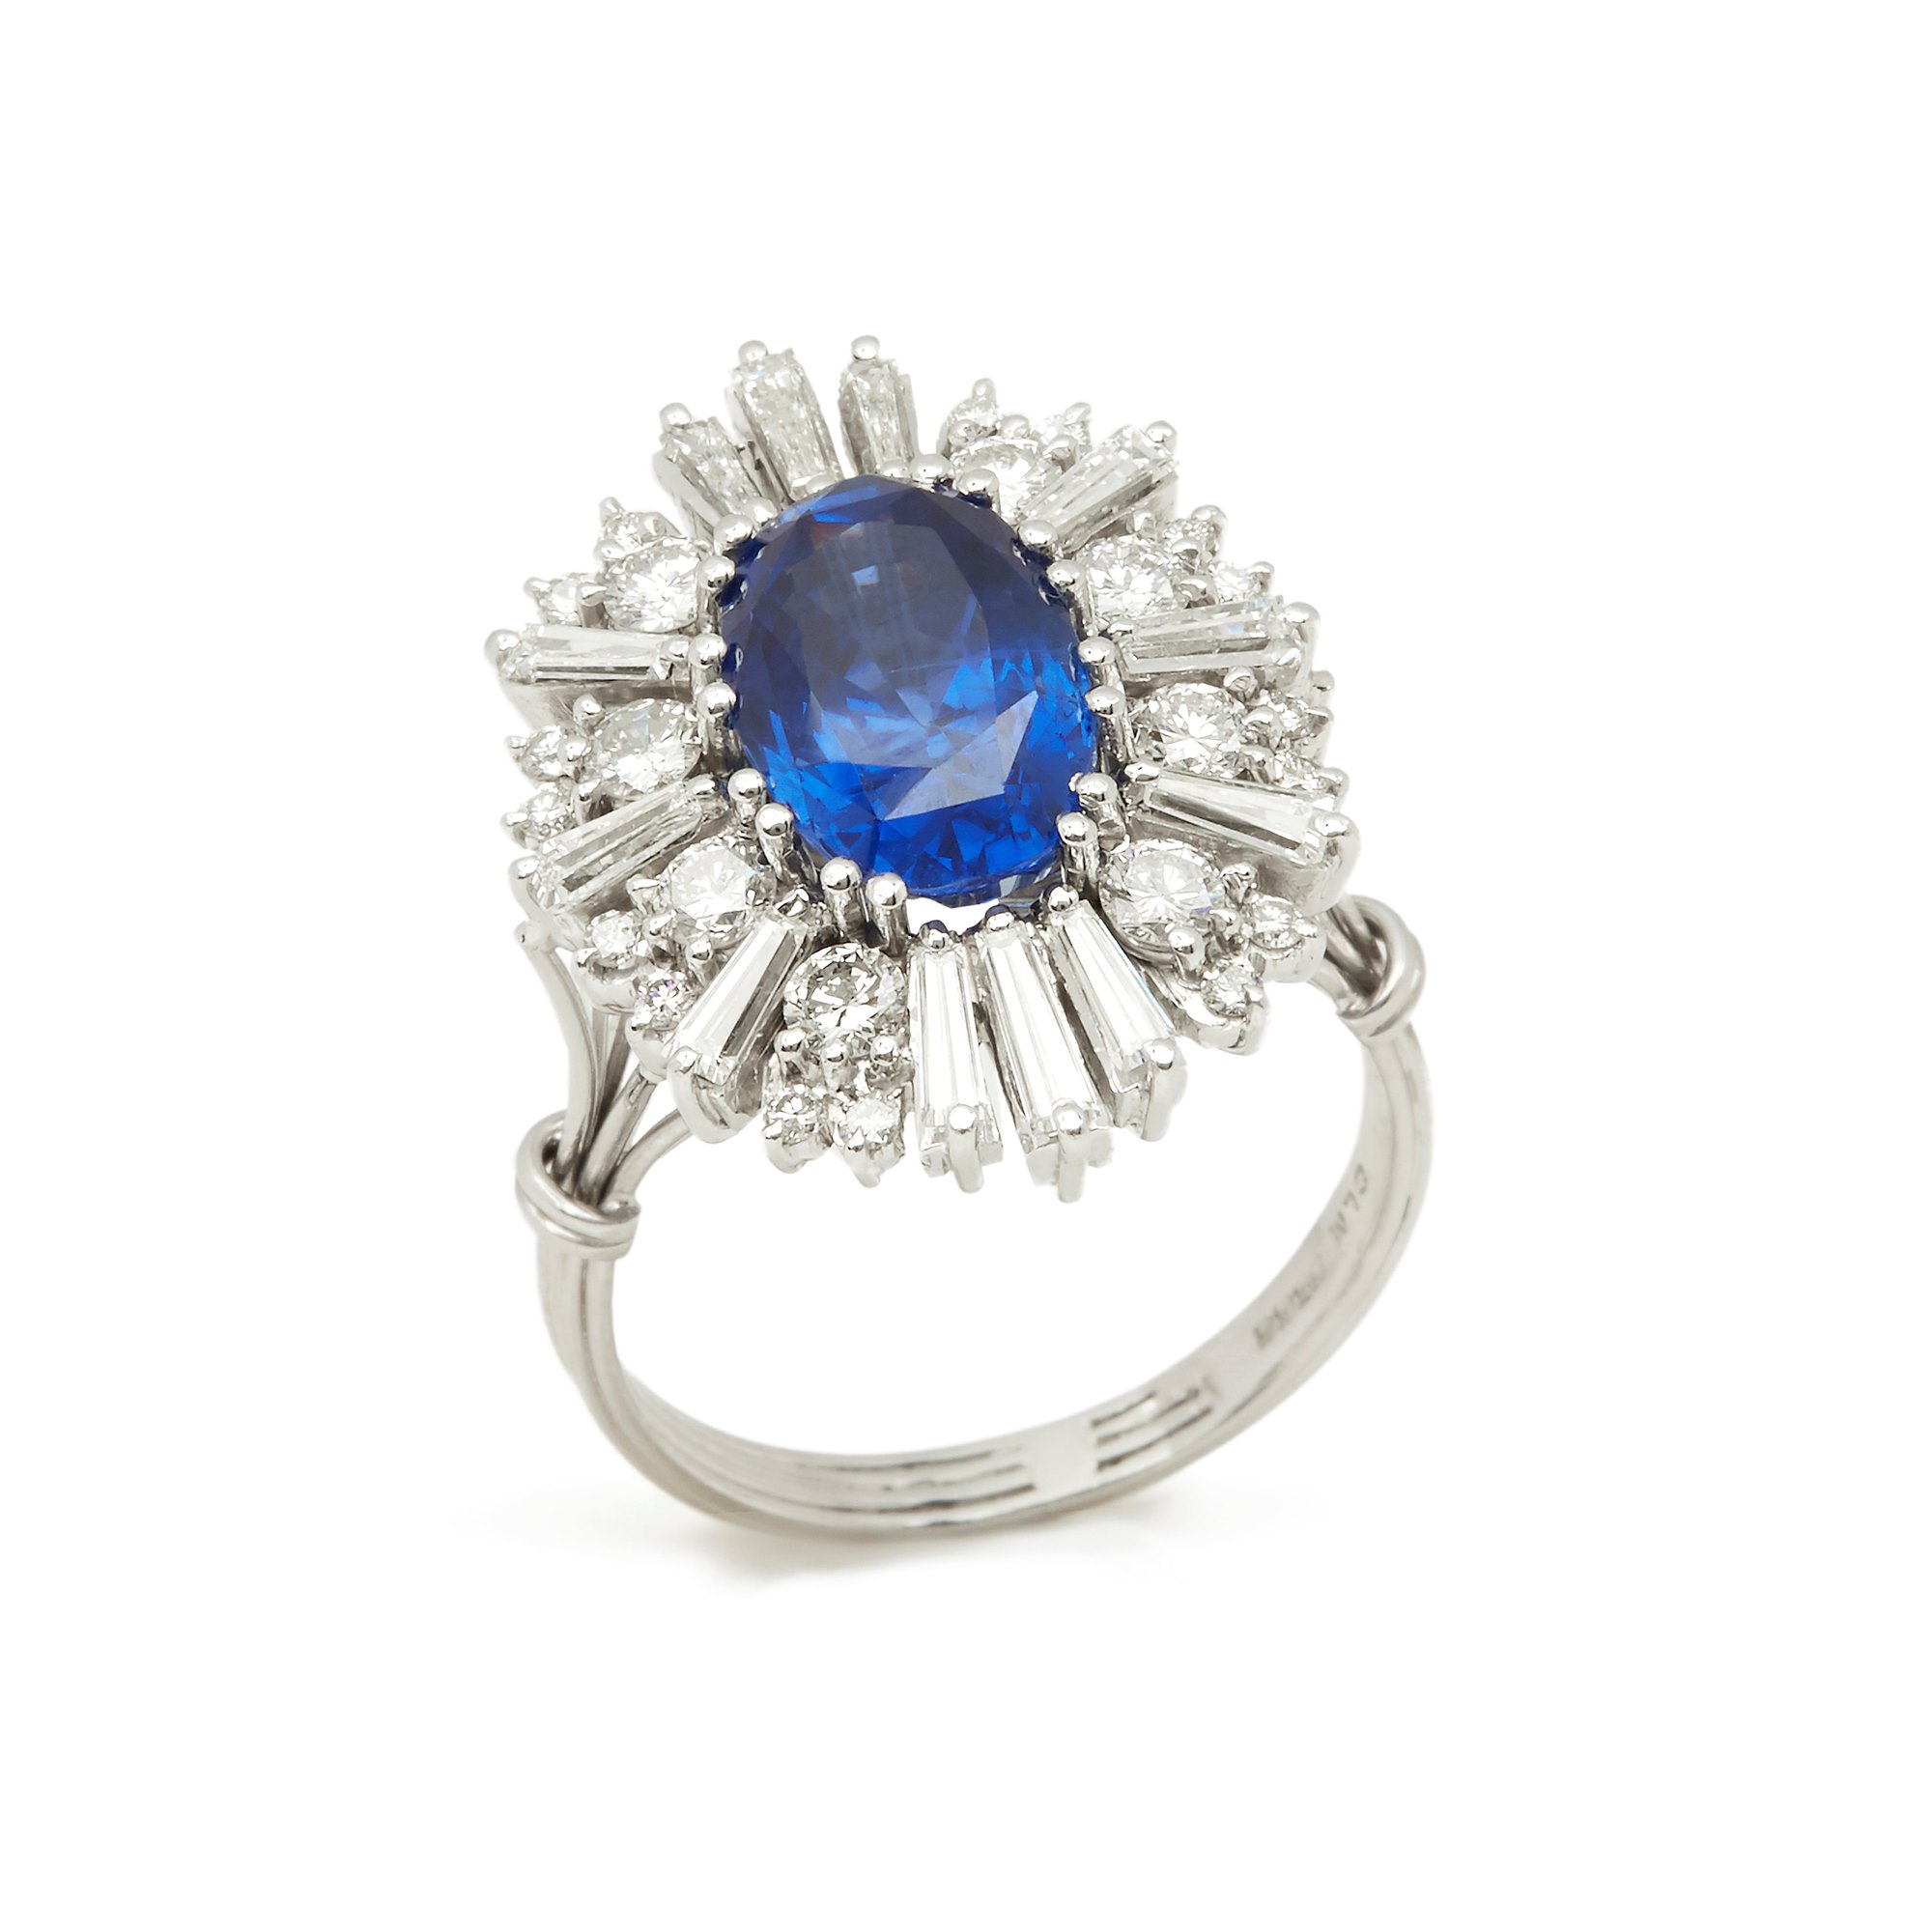 Saffier Certified 4.5ct Unheated Burmese Sapphire and Diamond Ring